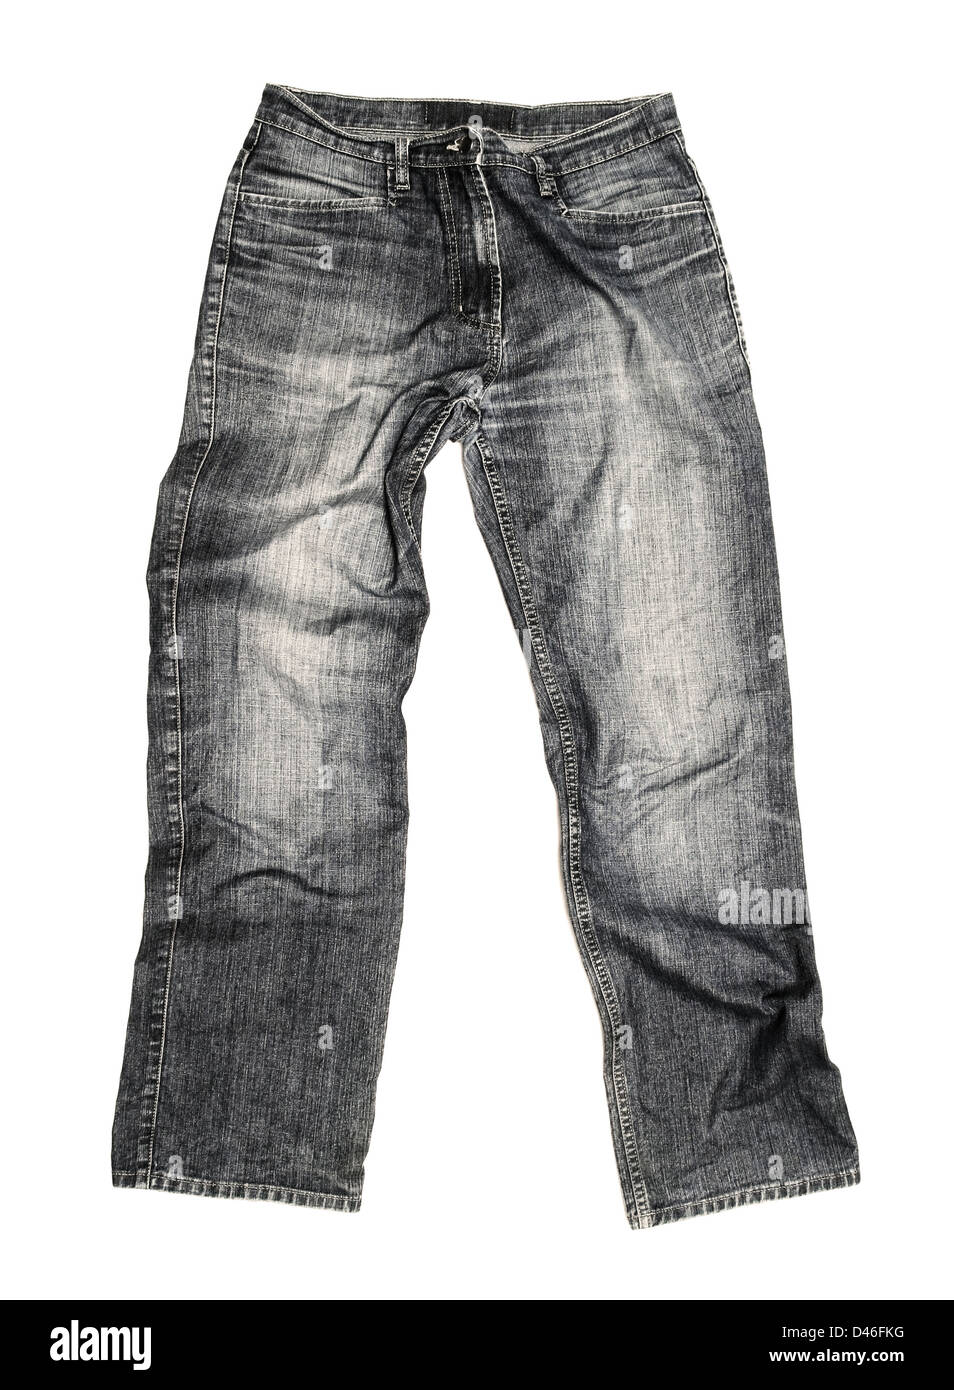 Jeans isolated on white background Stock Photo - Alamy